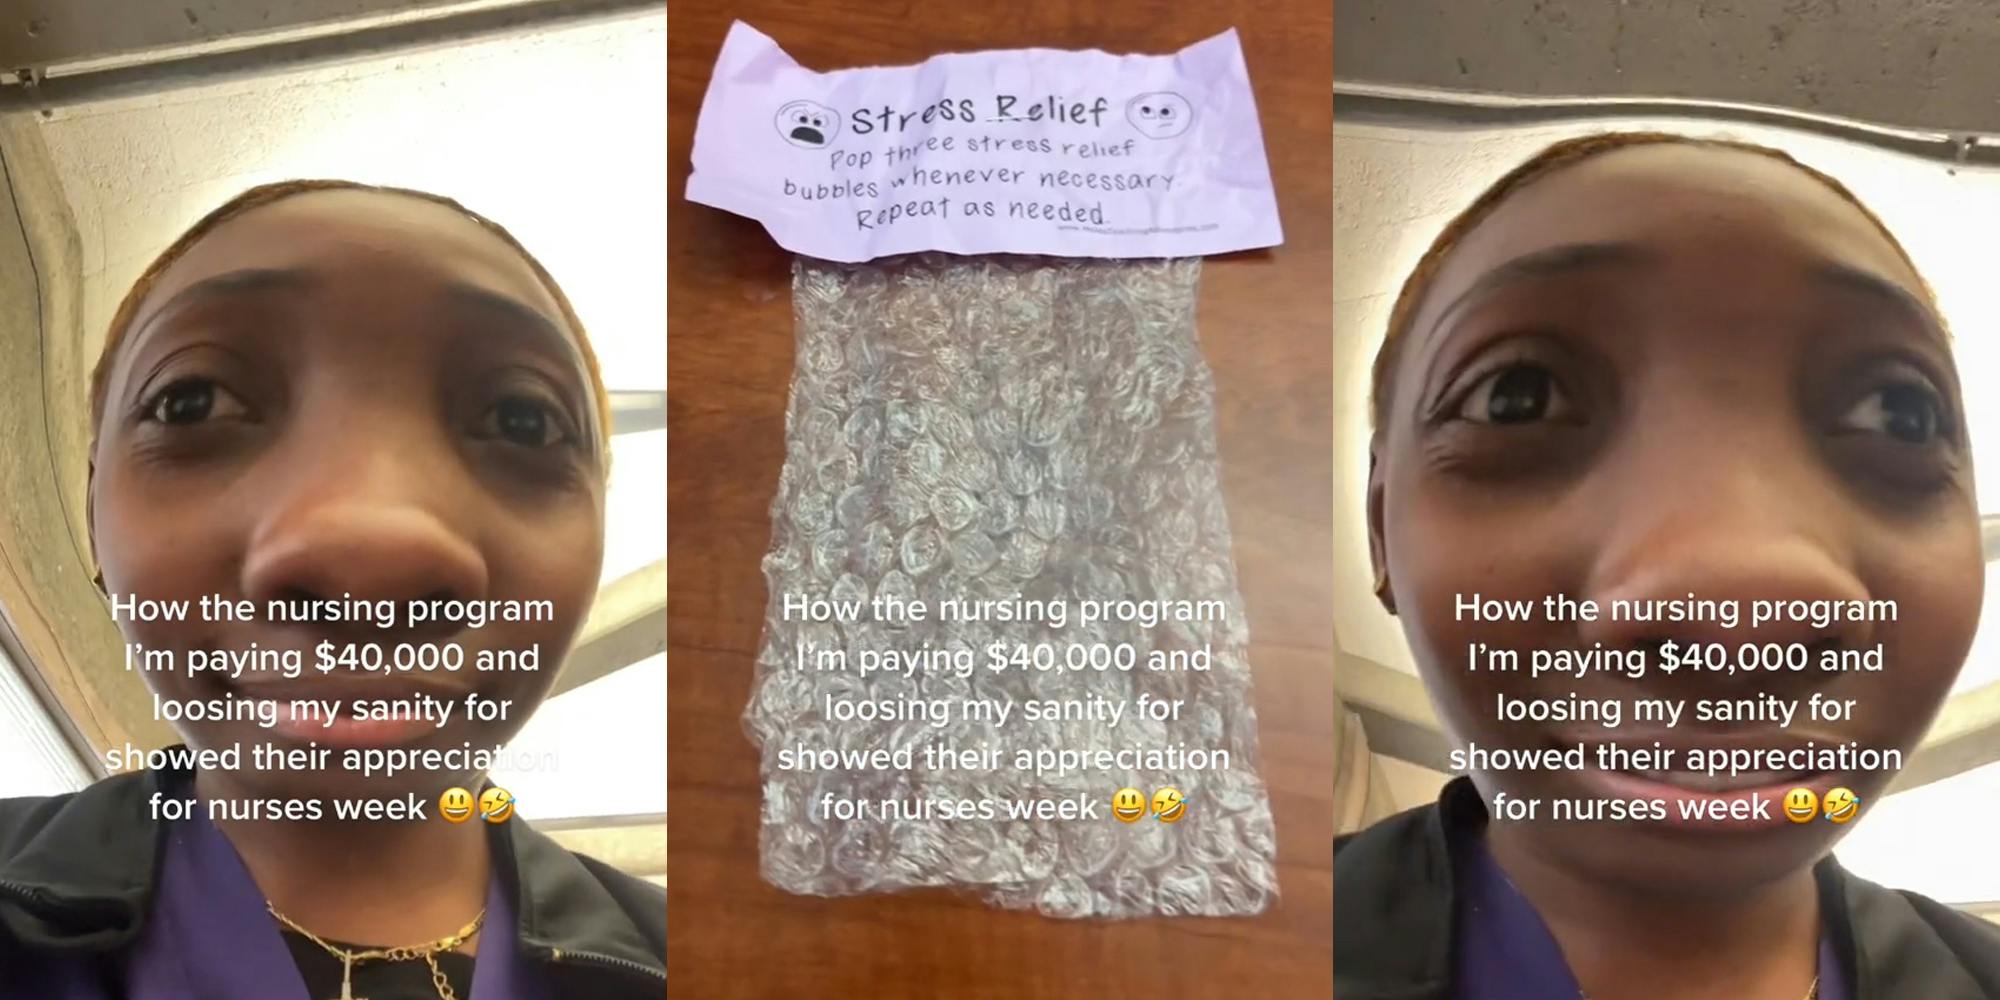 nurse with face filter on with caption "How the nursing program I'm paying $40,000 and loosing my sanity for showed their appreciation for nurses week" (l) bubble wrap on table with attached paper saying "Stress Relief pop three stress relief bubbles whenever necessary repeat as needed" with caption "How the nursing program I'm paying $40,000 and loosing my sanity for showed their appreciation for nurses week" (c) nurse with face filter on with caption "How the nursing program I'm paying $40,000 and loosing my sanity for showed their appreciation for nurses week" (r)